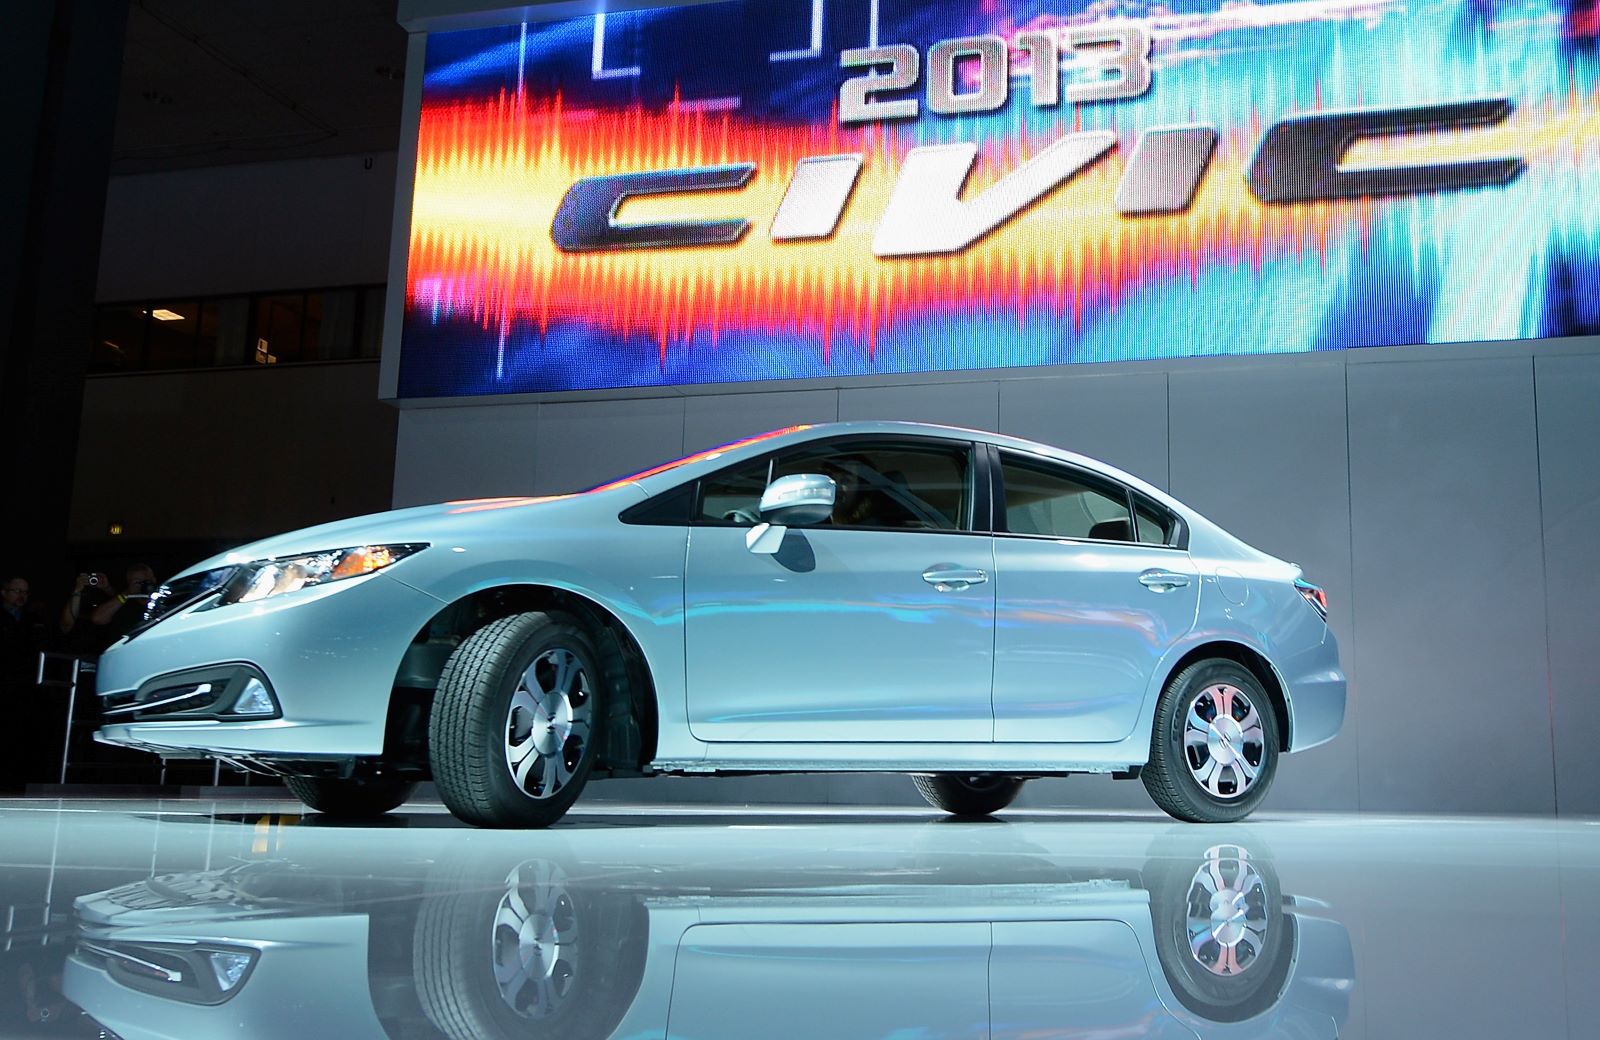 2013 Honda Civic Hybrid when it first debuted